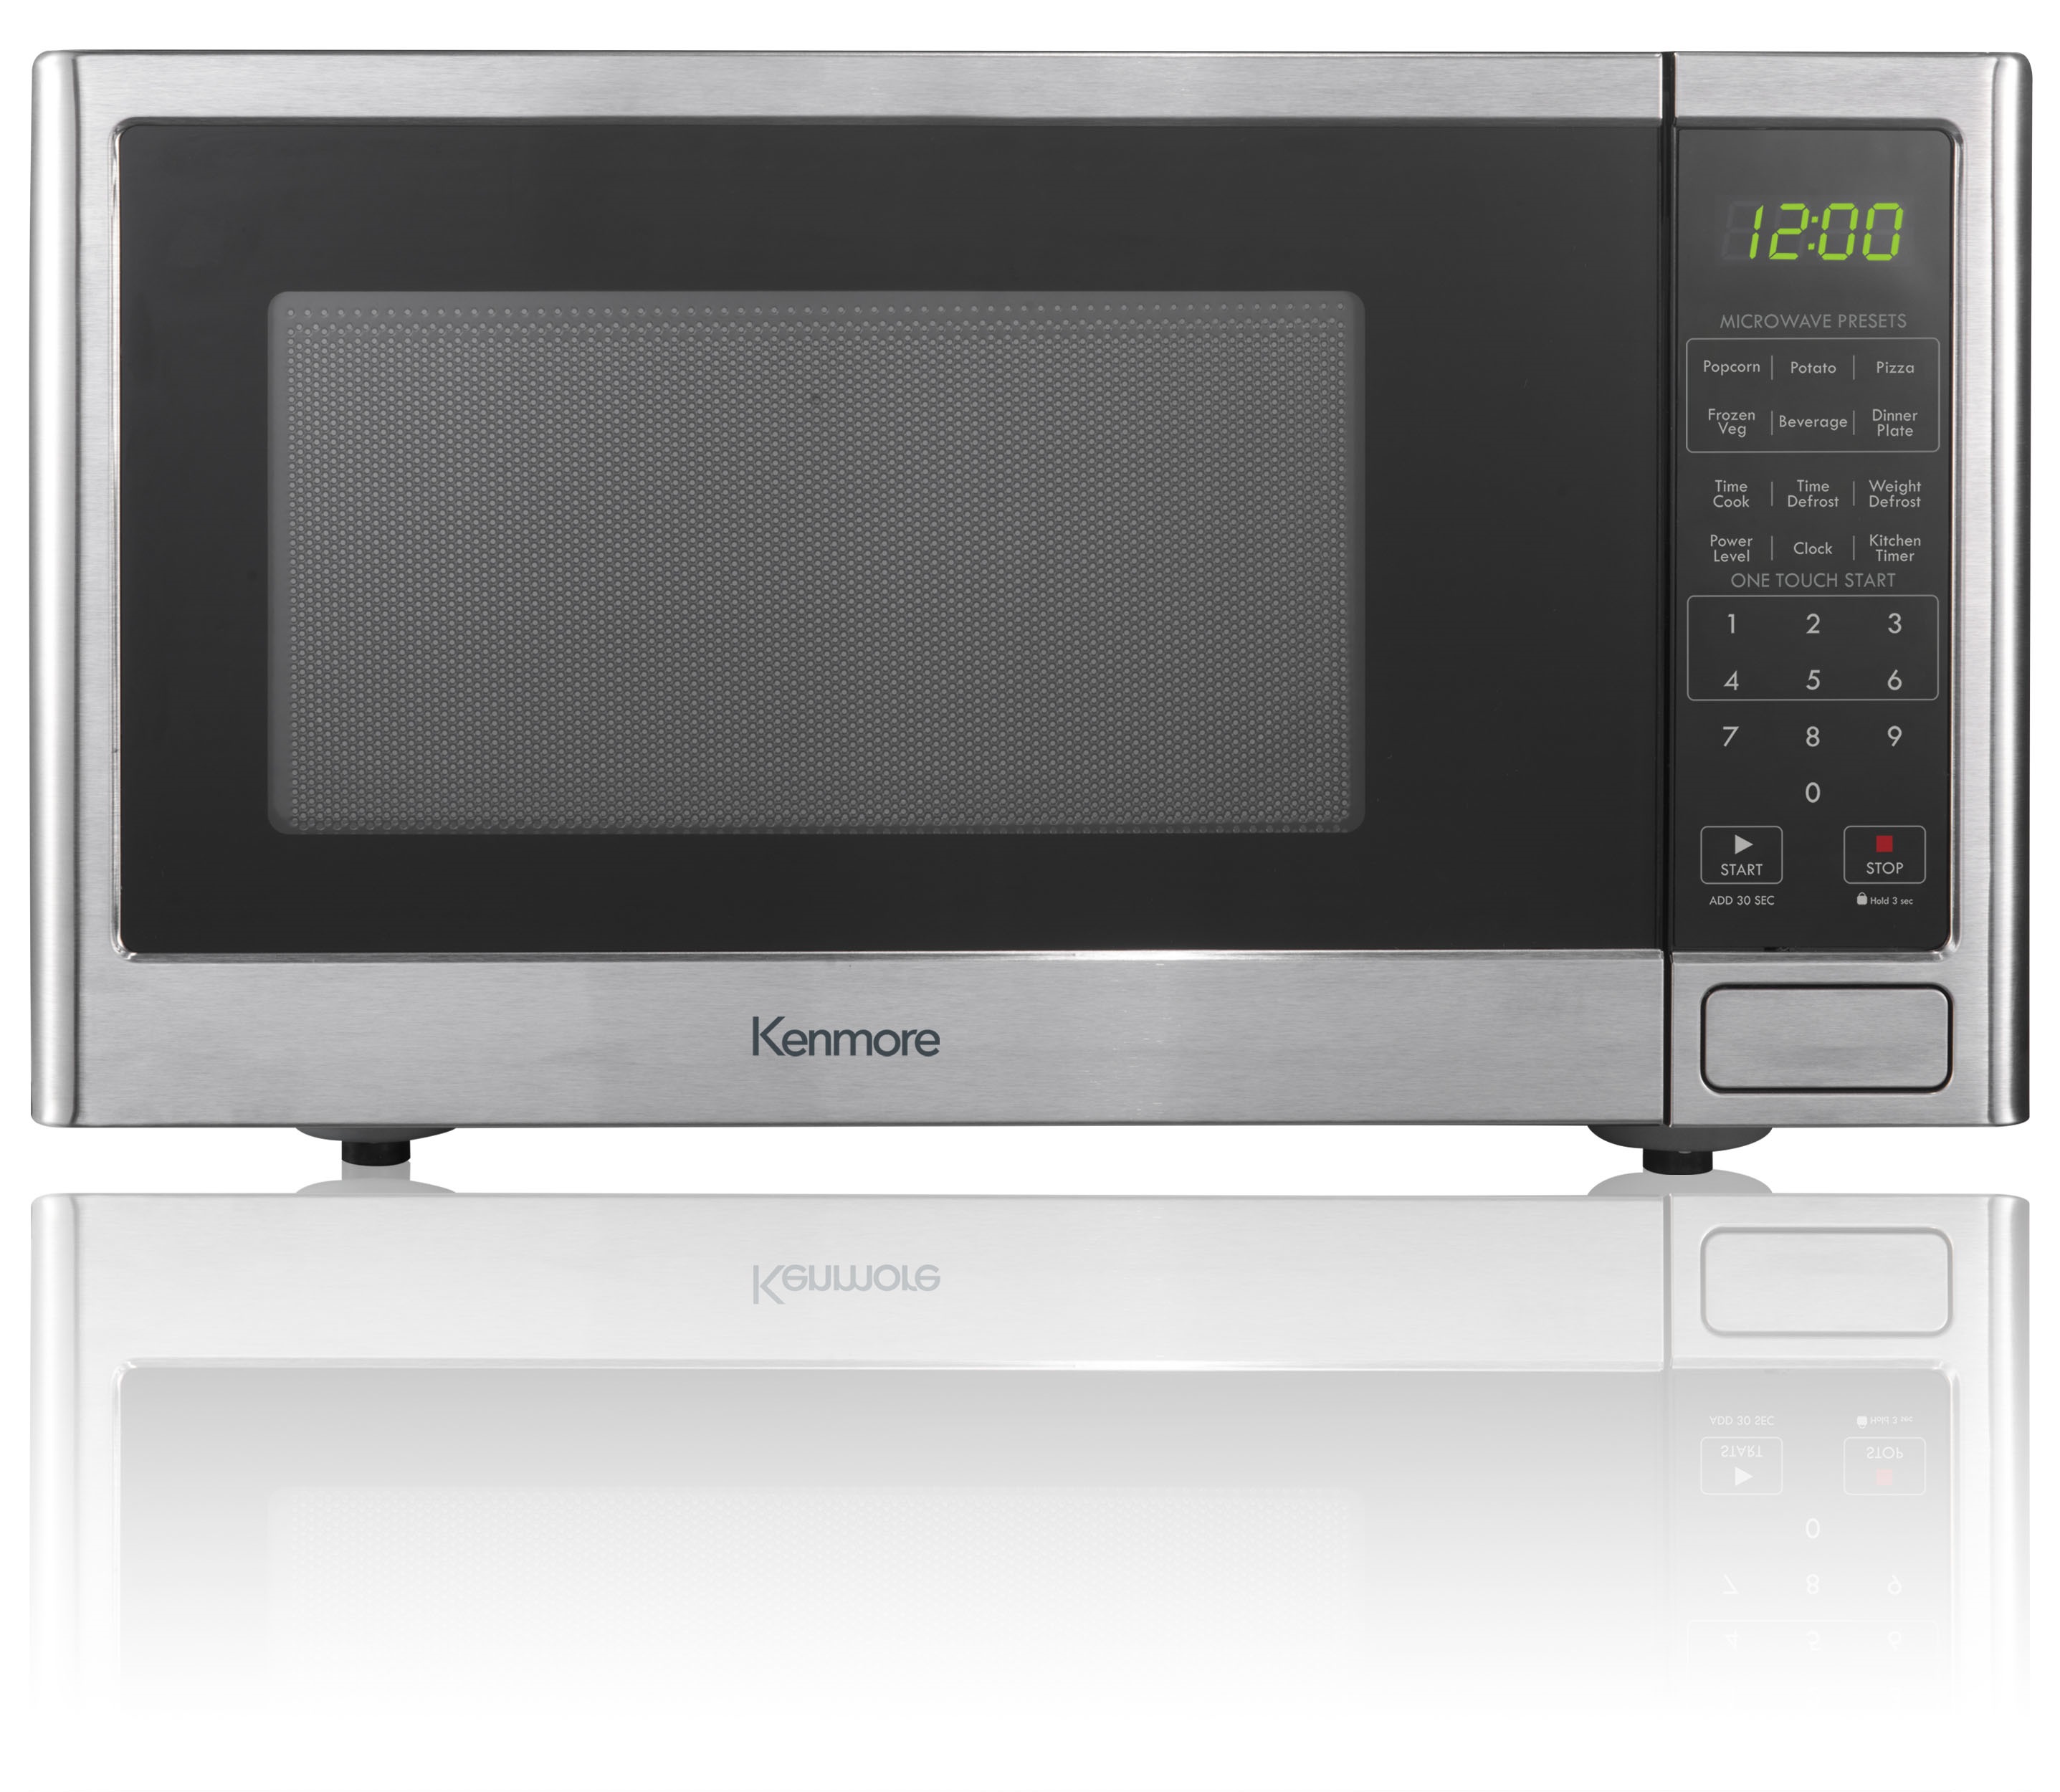 Kenmore 73773 0.9 cu. ft. Microwave Oven - Stainless Steel | Shop Your